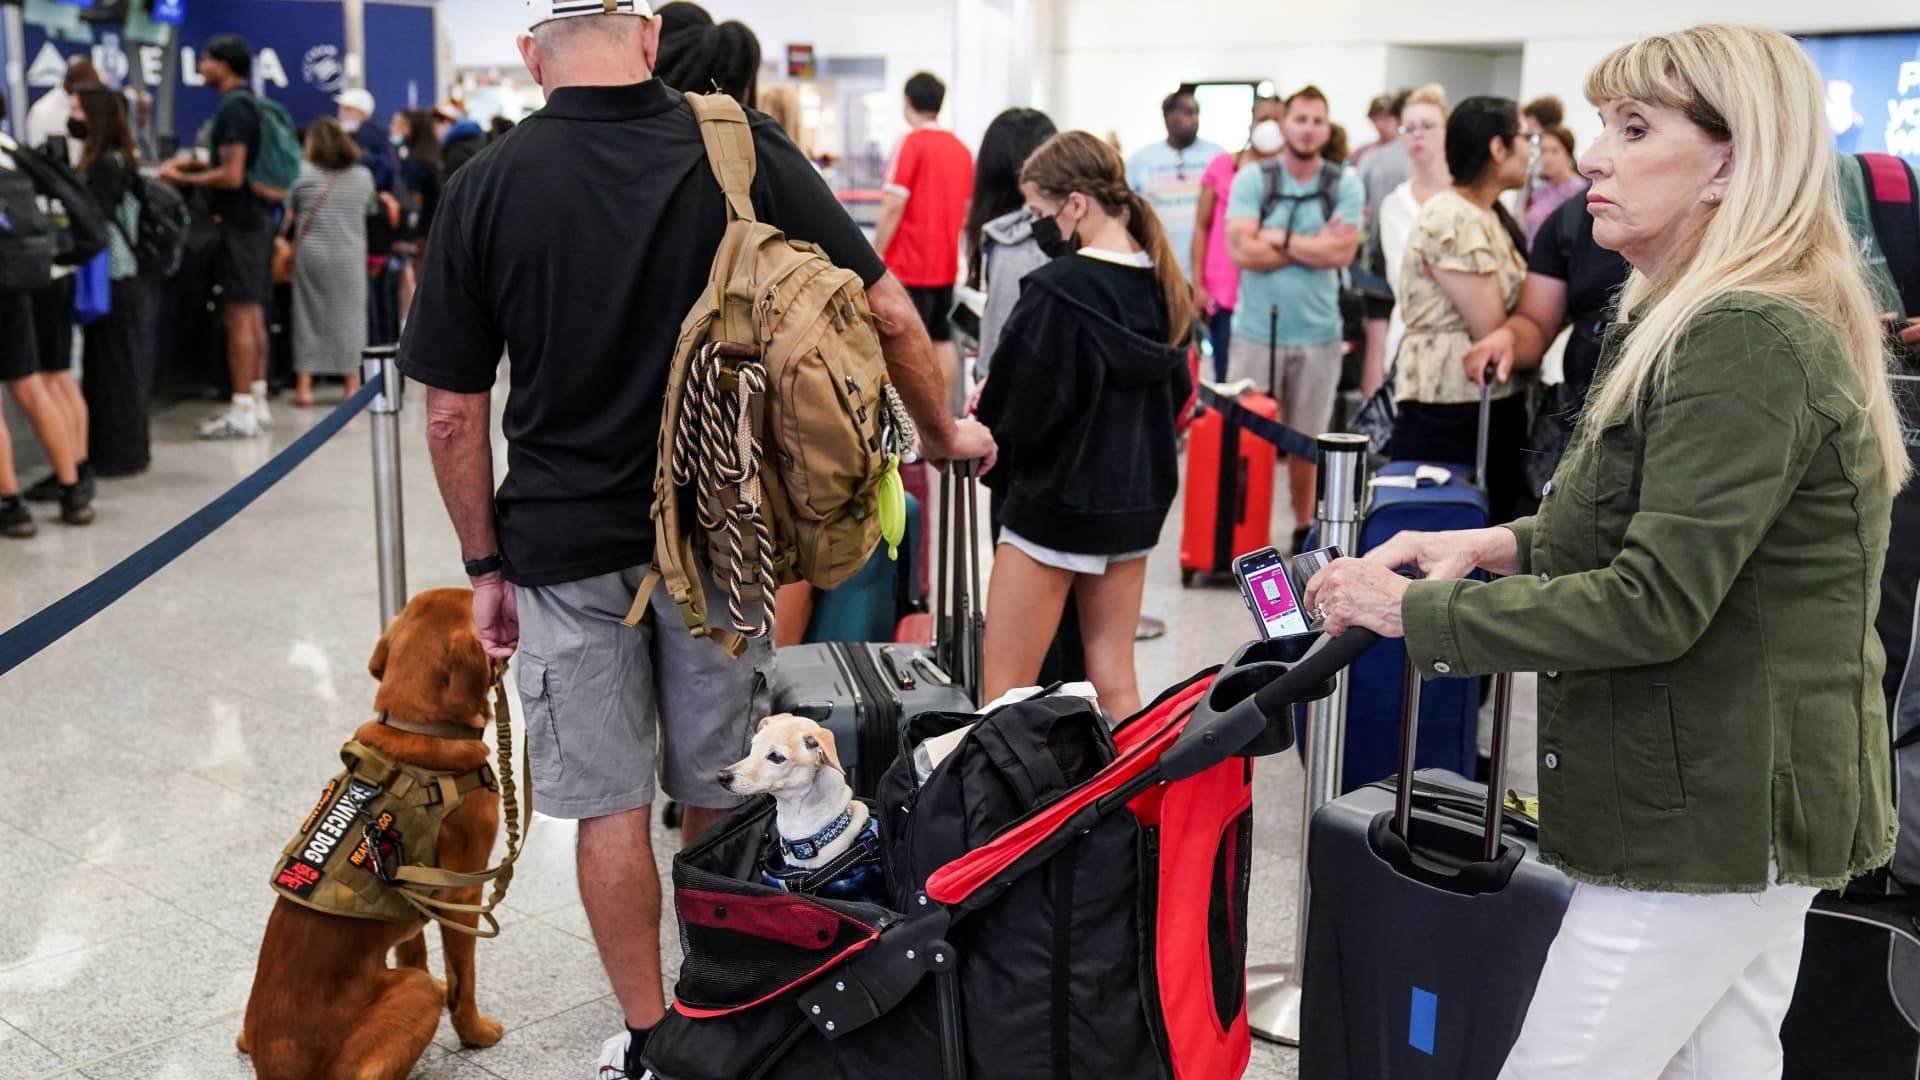 Airline ticket prices are finally starting to cool down as the peak summer travel season comes to an end. Now what?